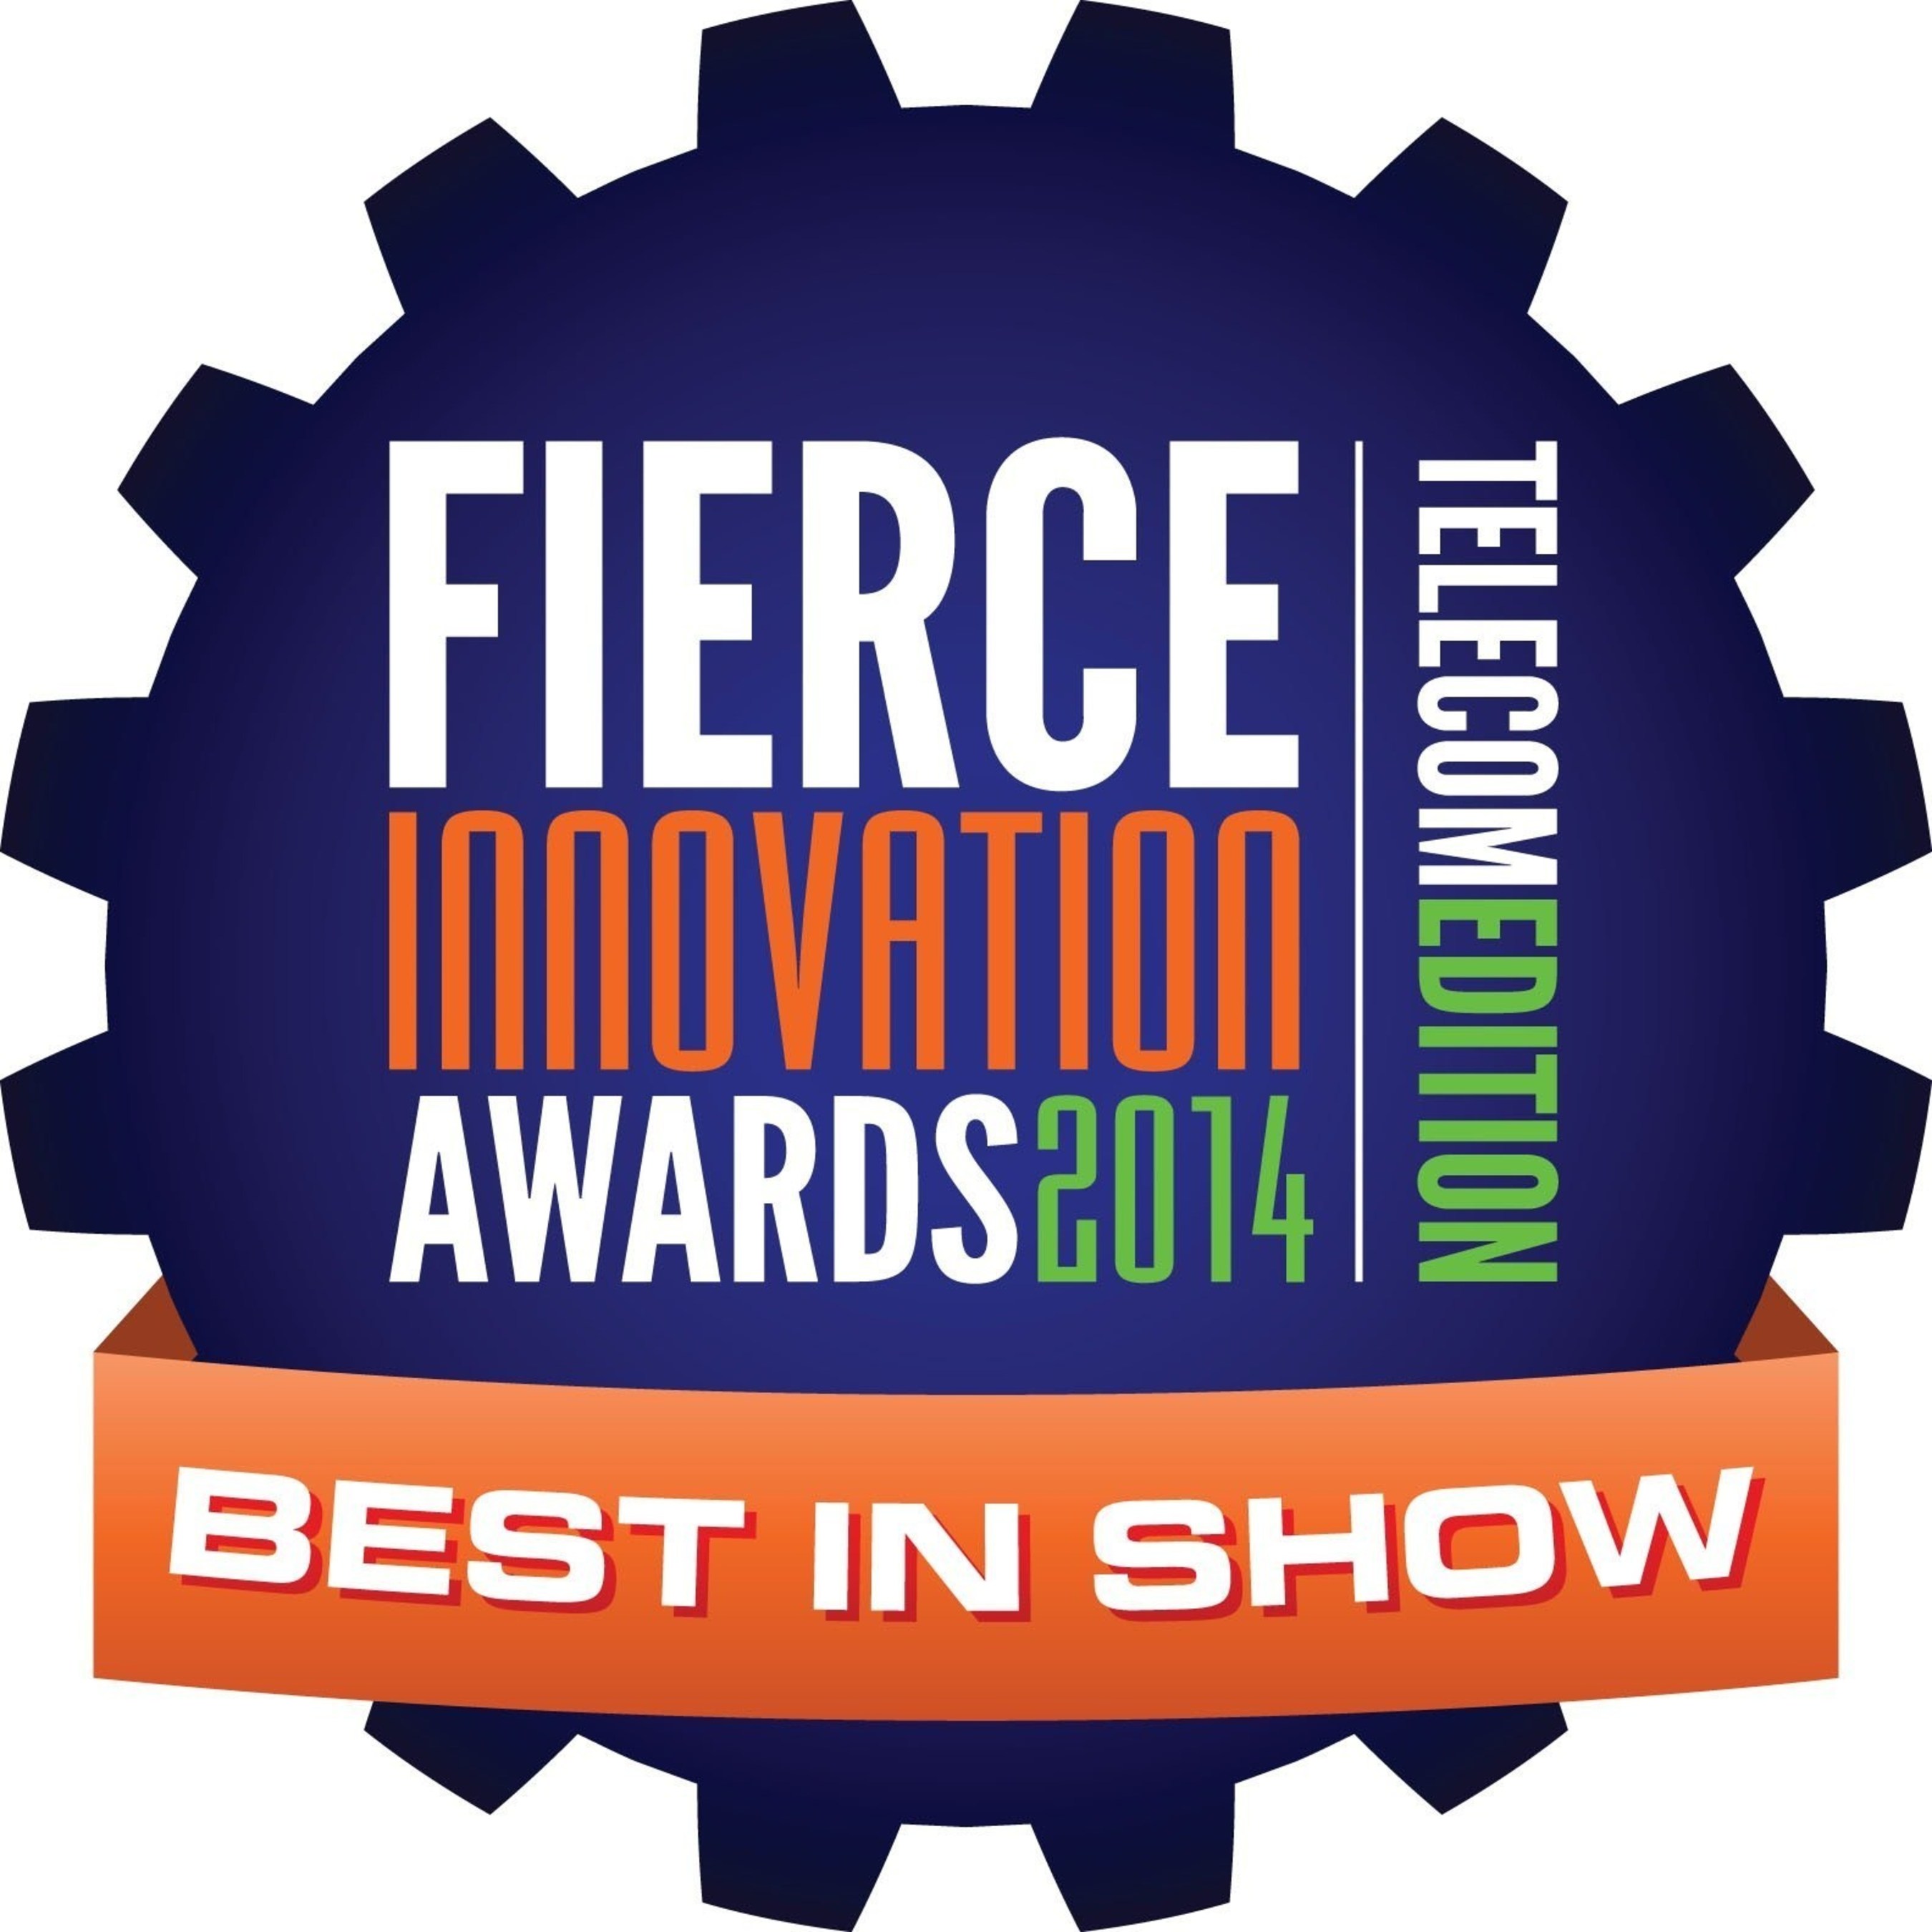 Procera was named a winner and "Best in Show" in the 2014 Fierce Innovation Awards for "RAN Perspectives"